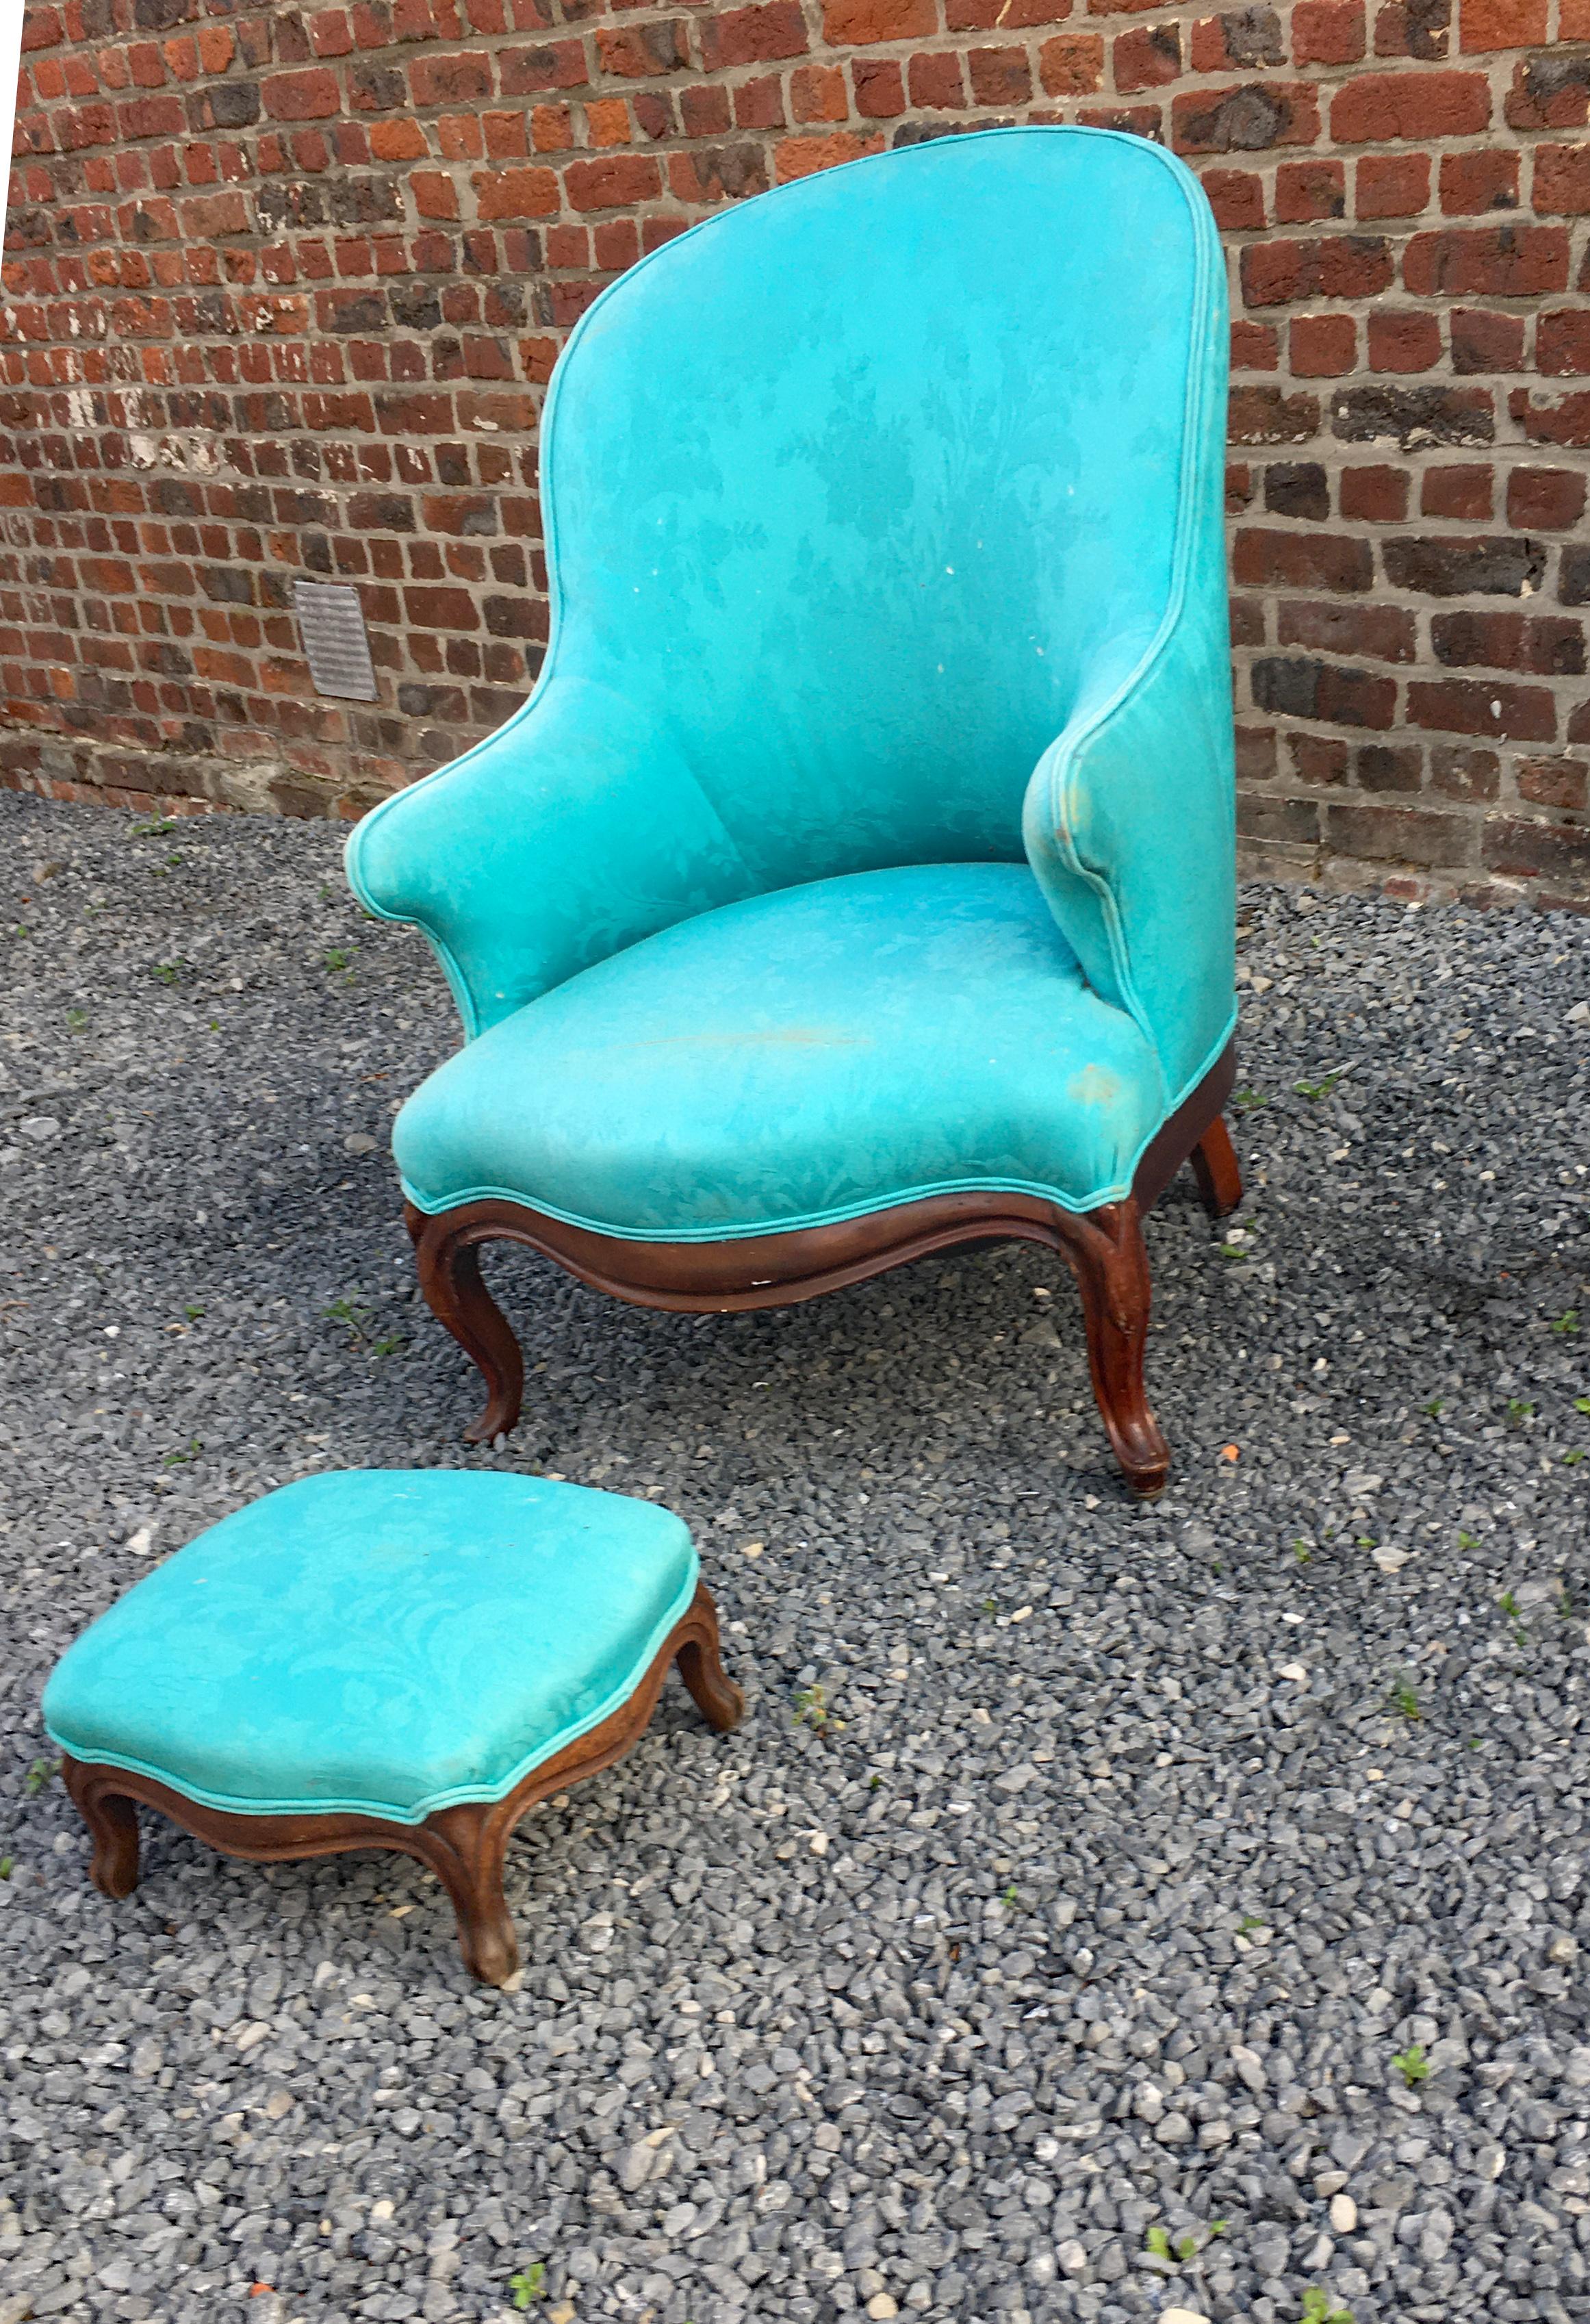 Louis Philippe style armchair and footrest, circa 1930/1950.